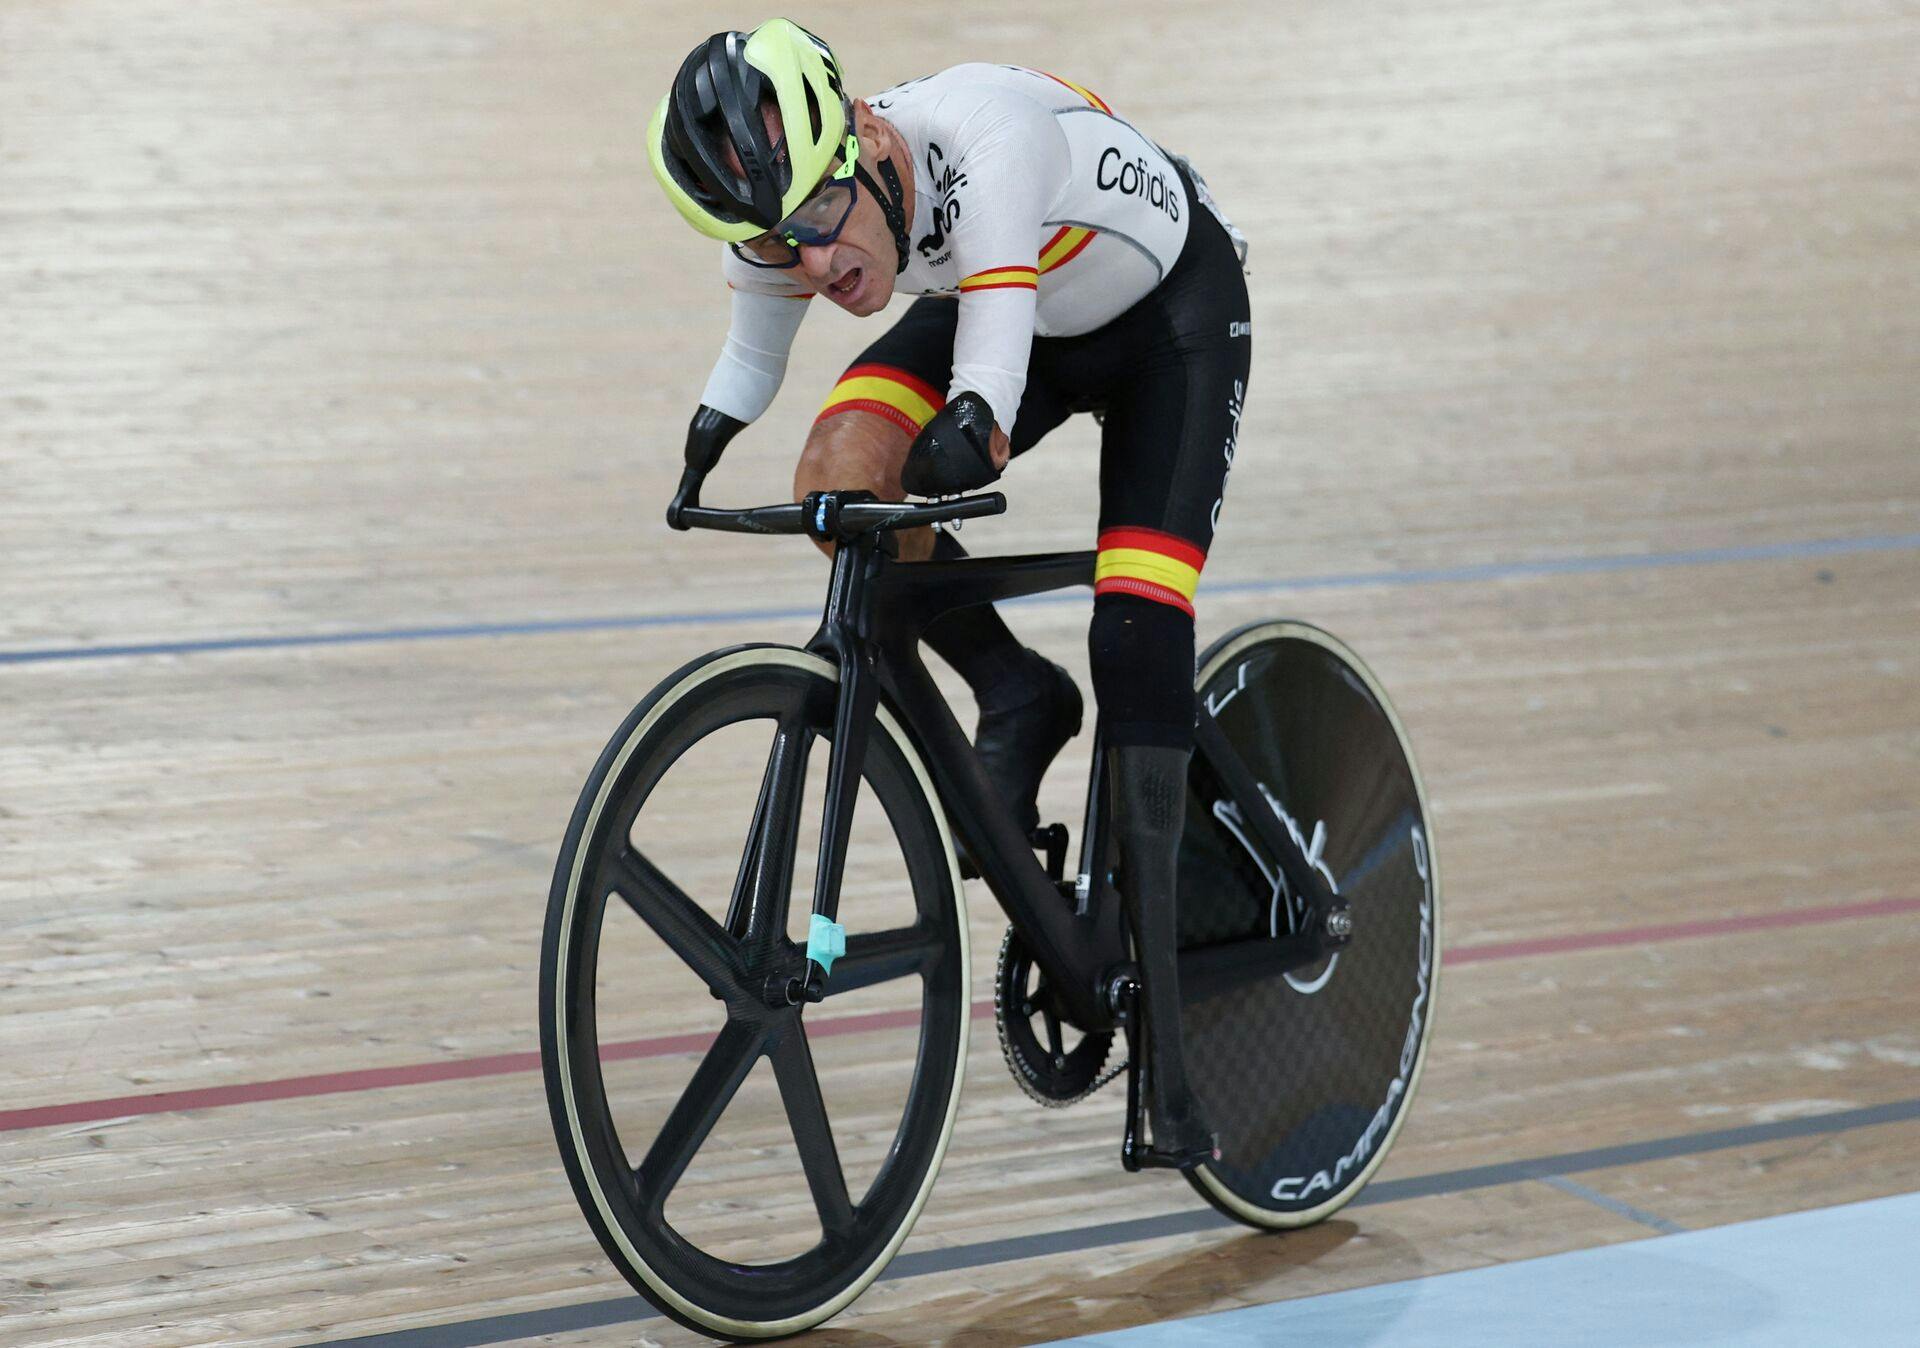 Spain's Ricardo Ten Argiles leads and goes on to win the men's para-cycling C1 Scratch Race Final race during the UCI Cycling World Championships in Glasgow, Scotland on August 7, 2023 (Photo by Adrian DENNIS / AFP)